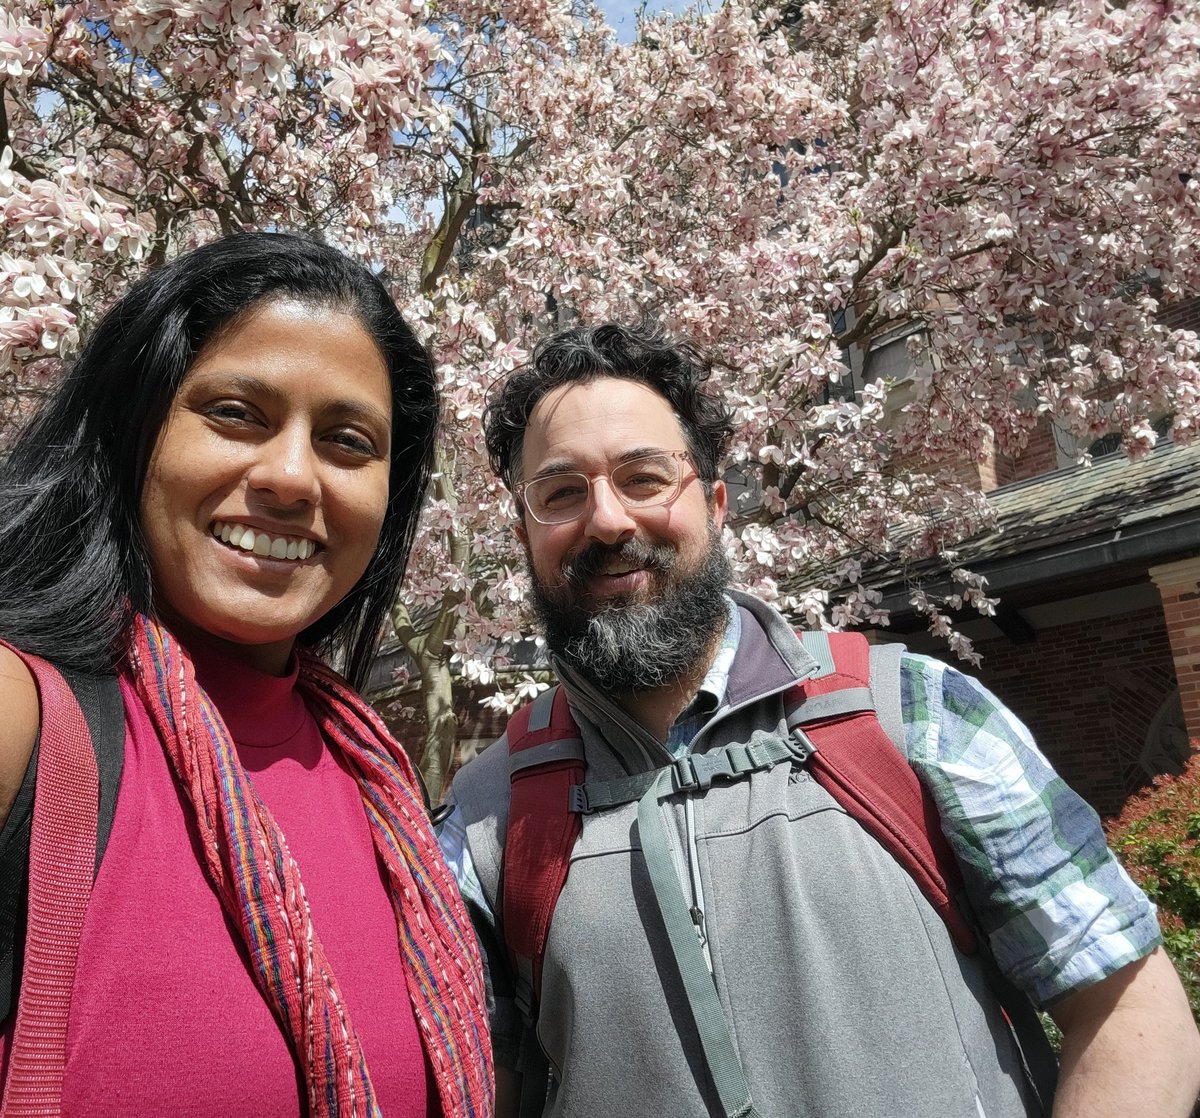 This week, I journeyed to New Haven to deliver a guest lecture on 'International Environmental Law and U.S. Environmental Law' in Prof. @JoshGalperin's Environmental Law Survey course at @YaleLawSch. We stopped to admire some beautiful spring blossoms 🌸 en route! @HaubEnviroLaw